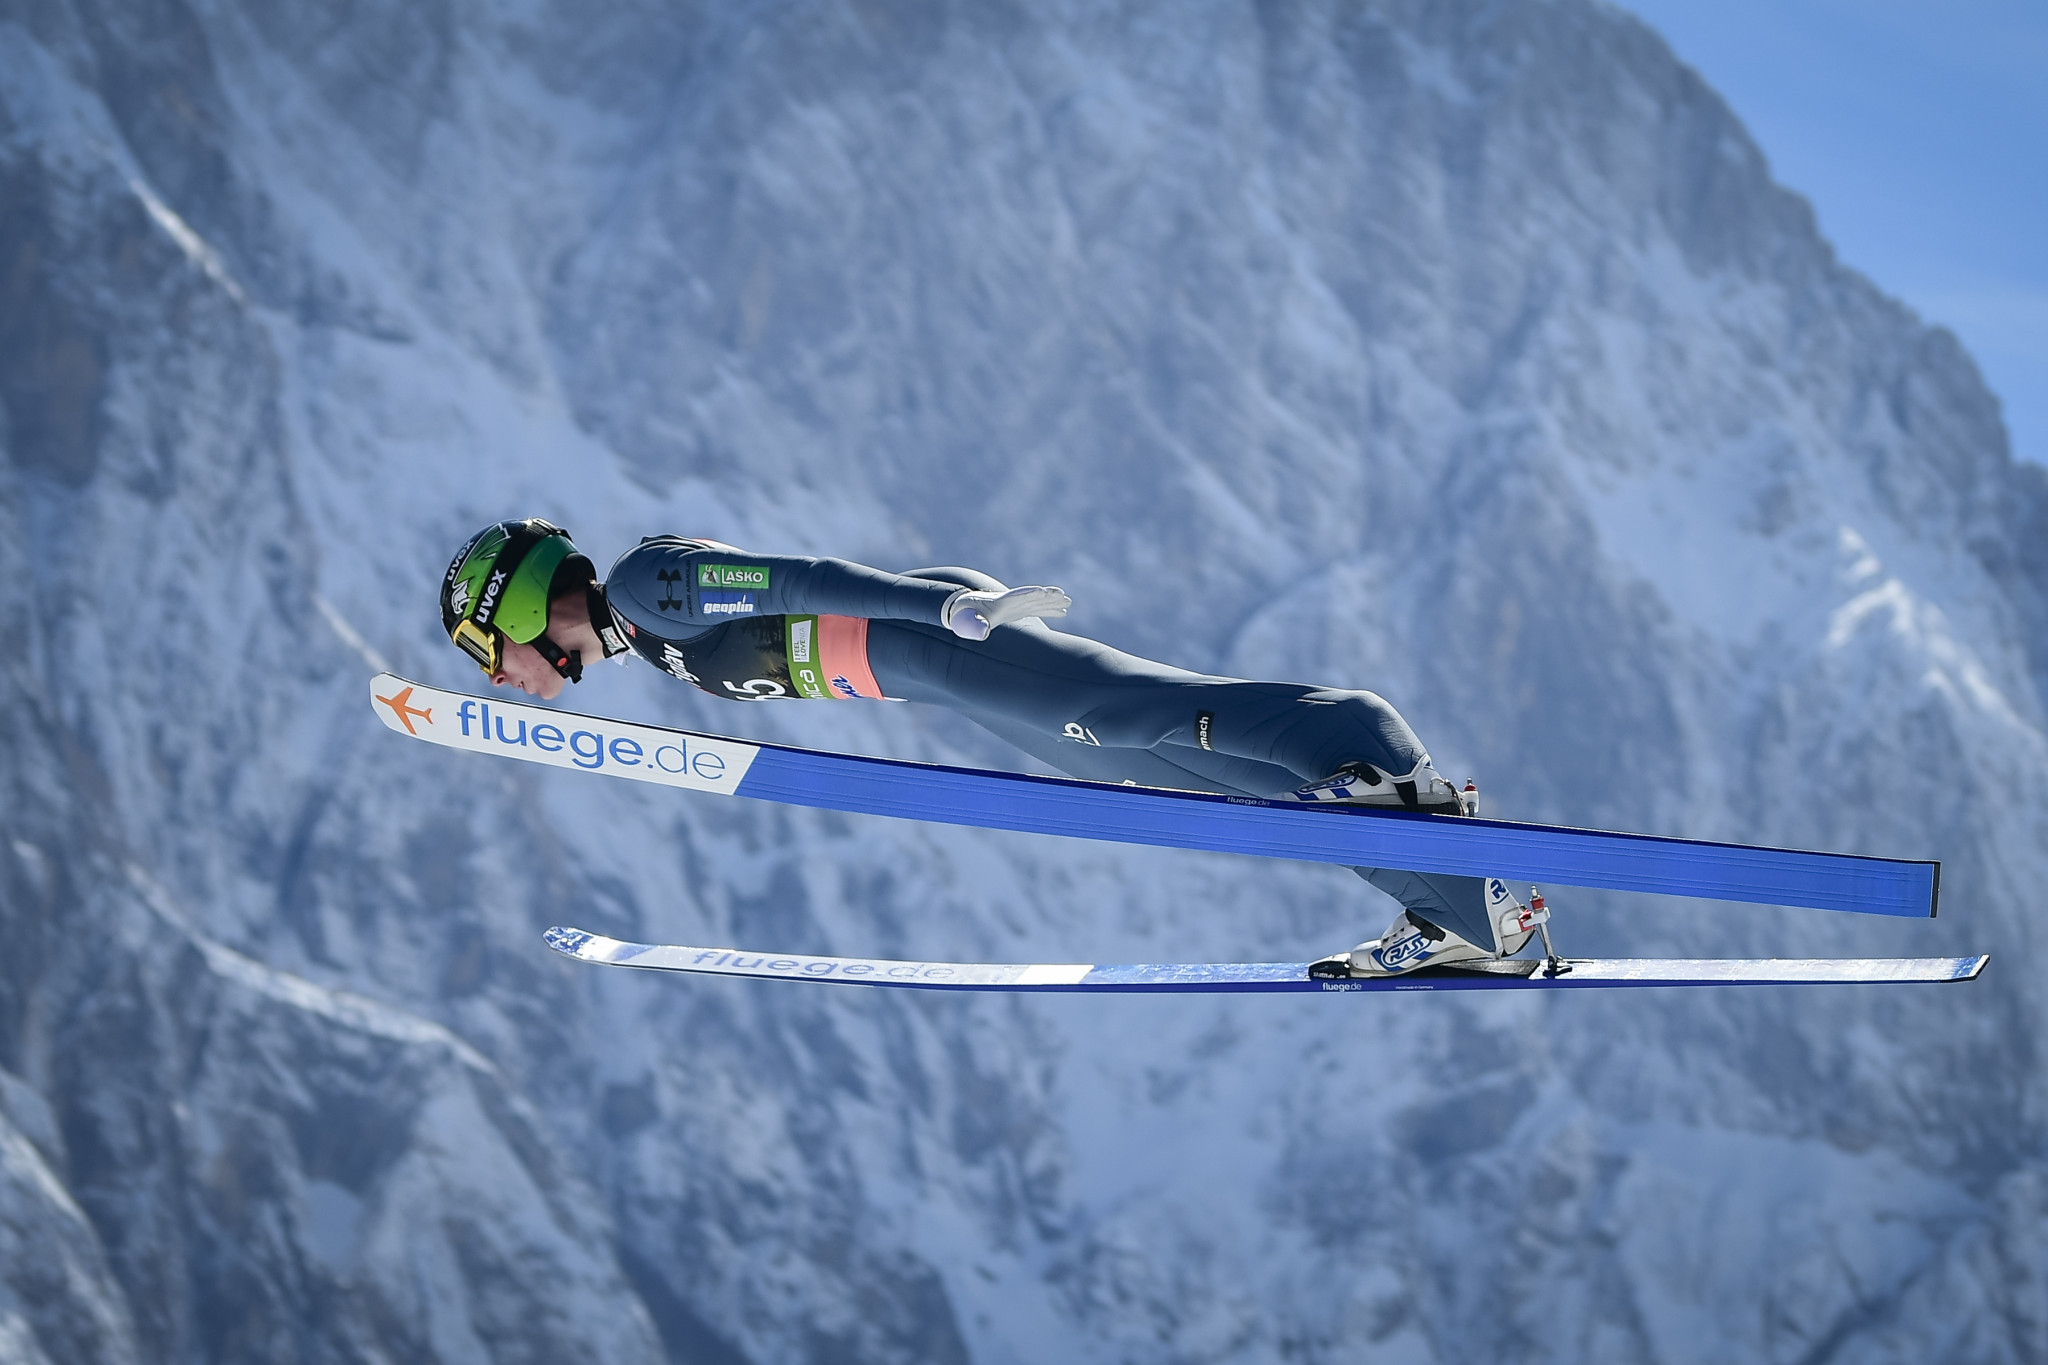 Slovenia's Timi Zajc won the first individual competition of the summer Ski Jumping Grand Prix series ©Getty Images